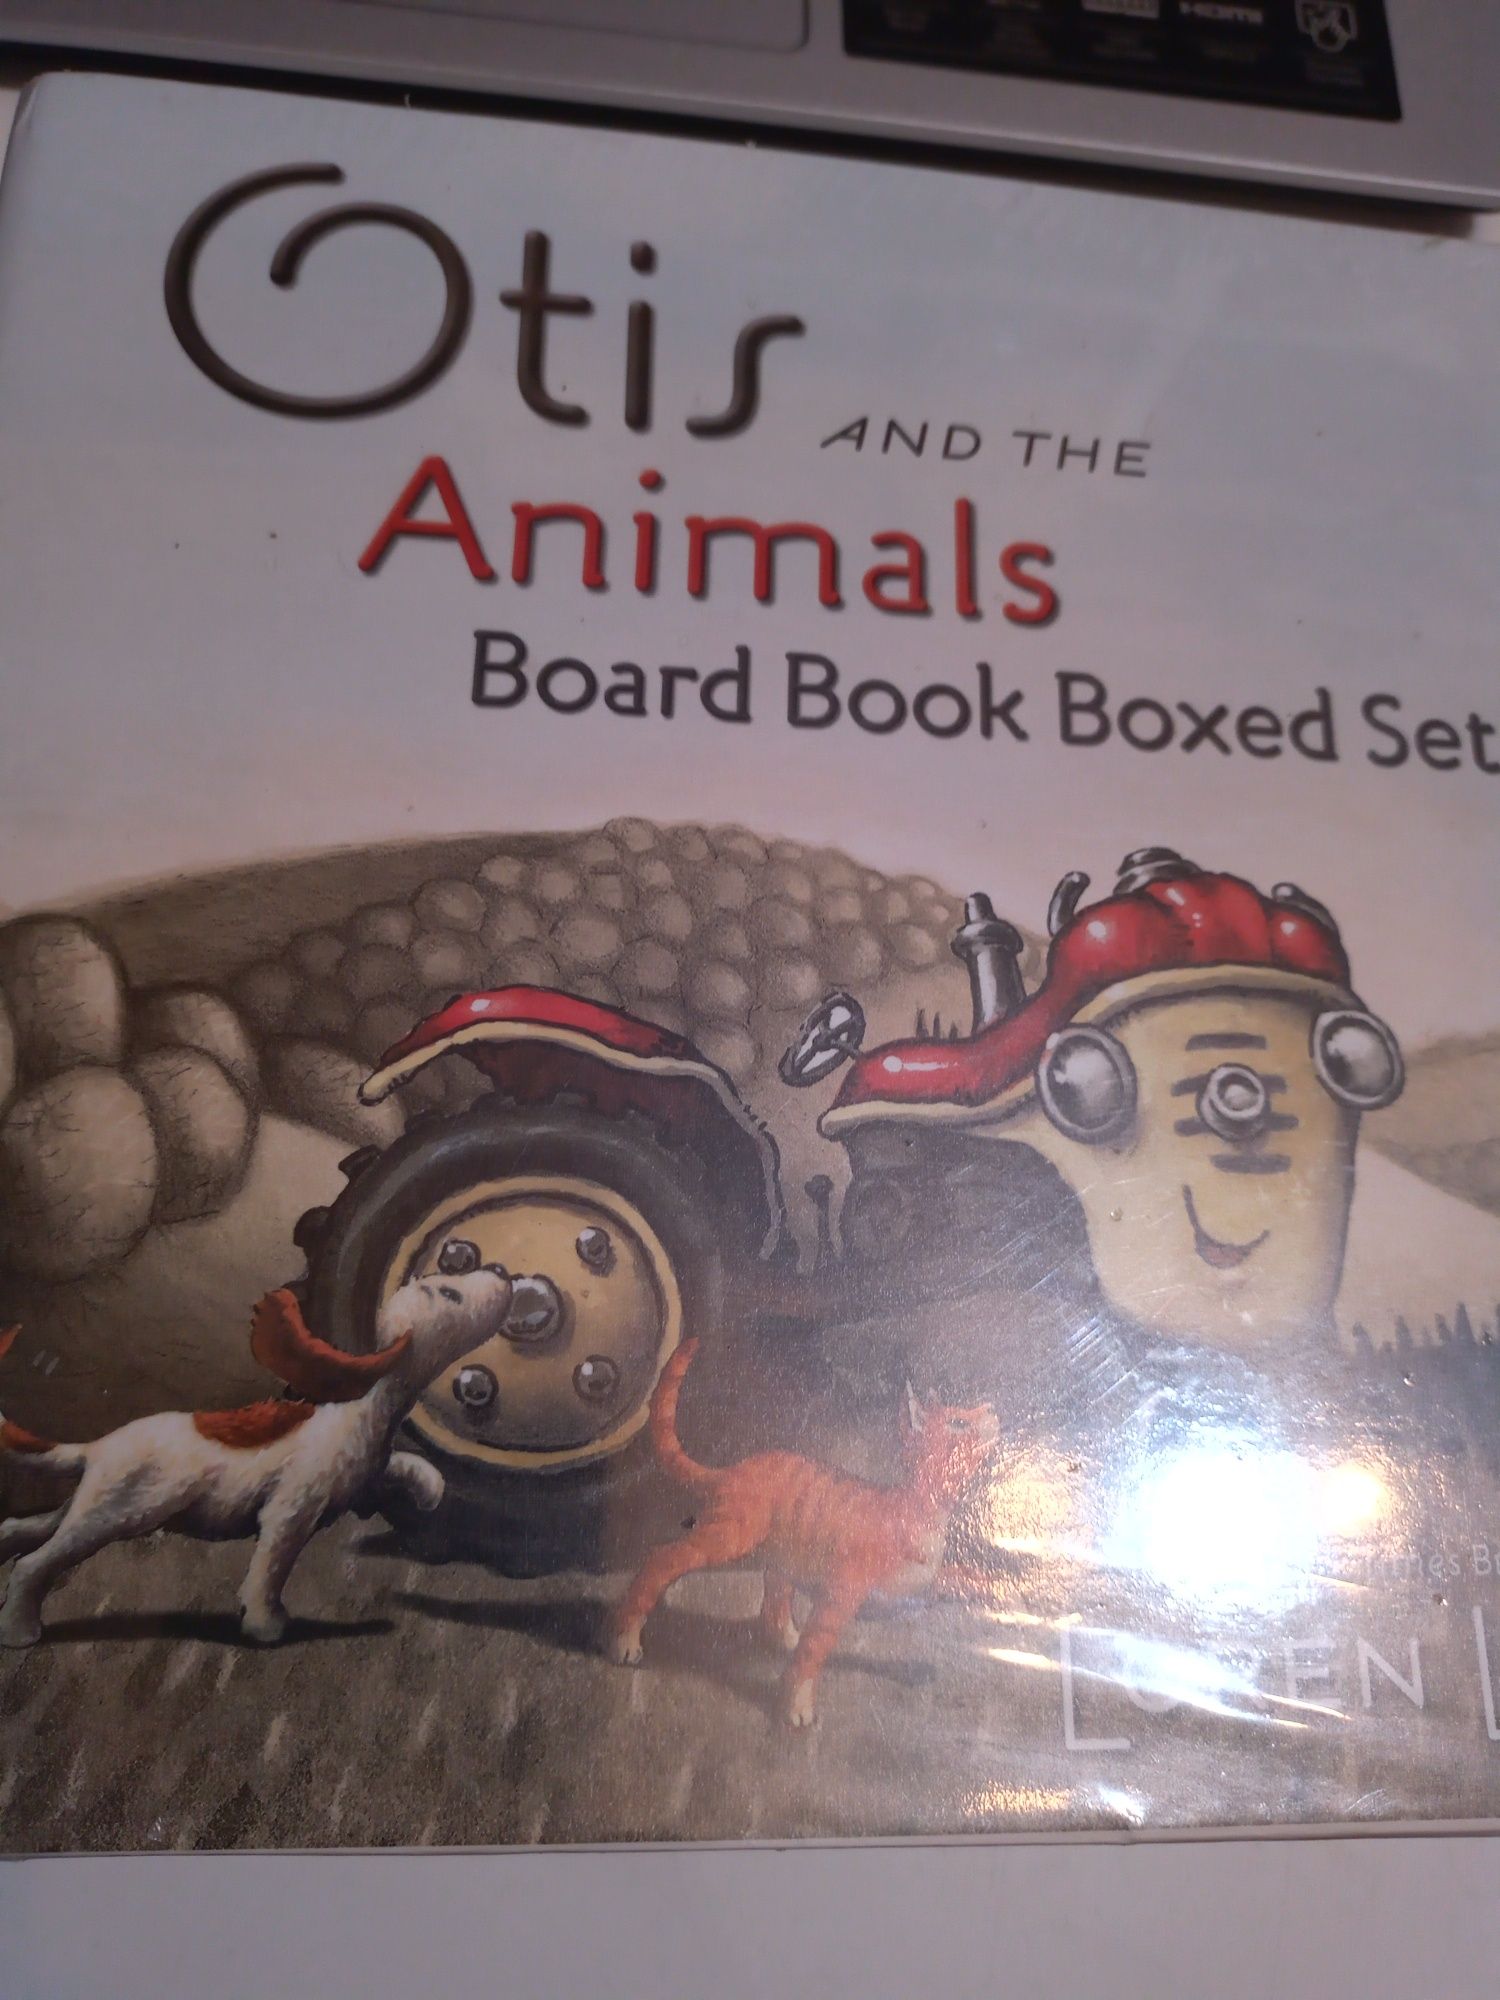 Otis and the Animals Board Book Boxed Set - Long